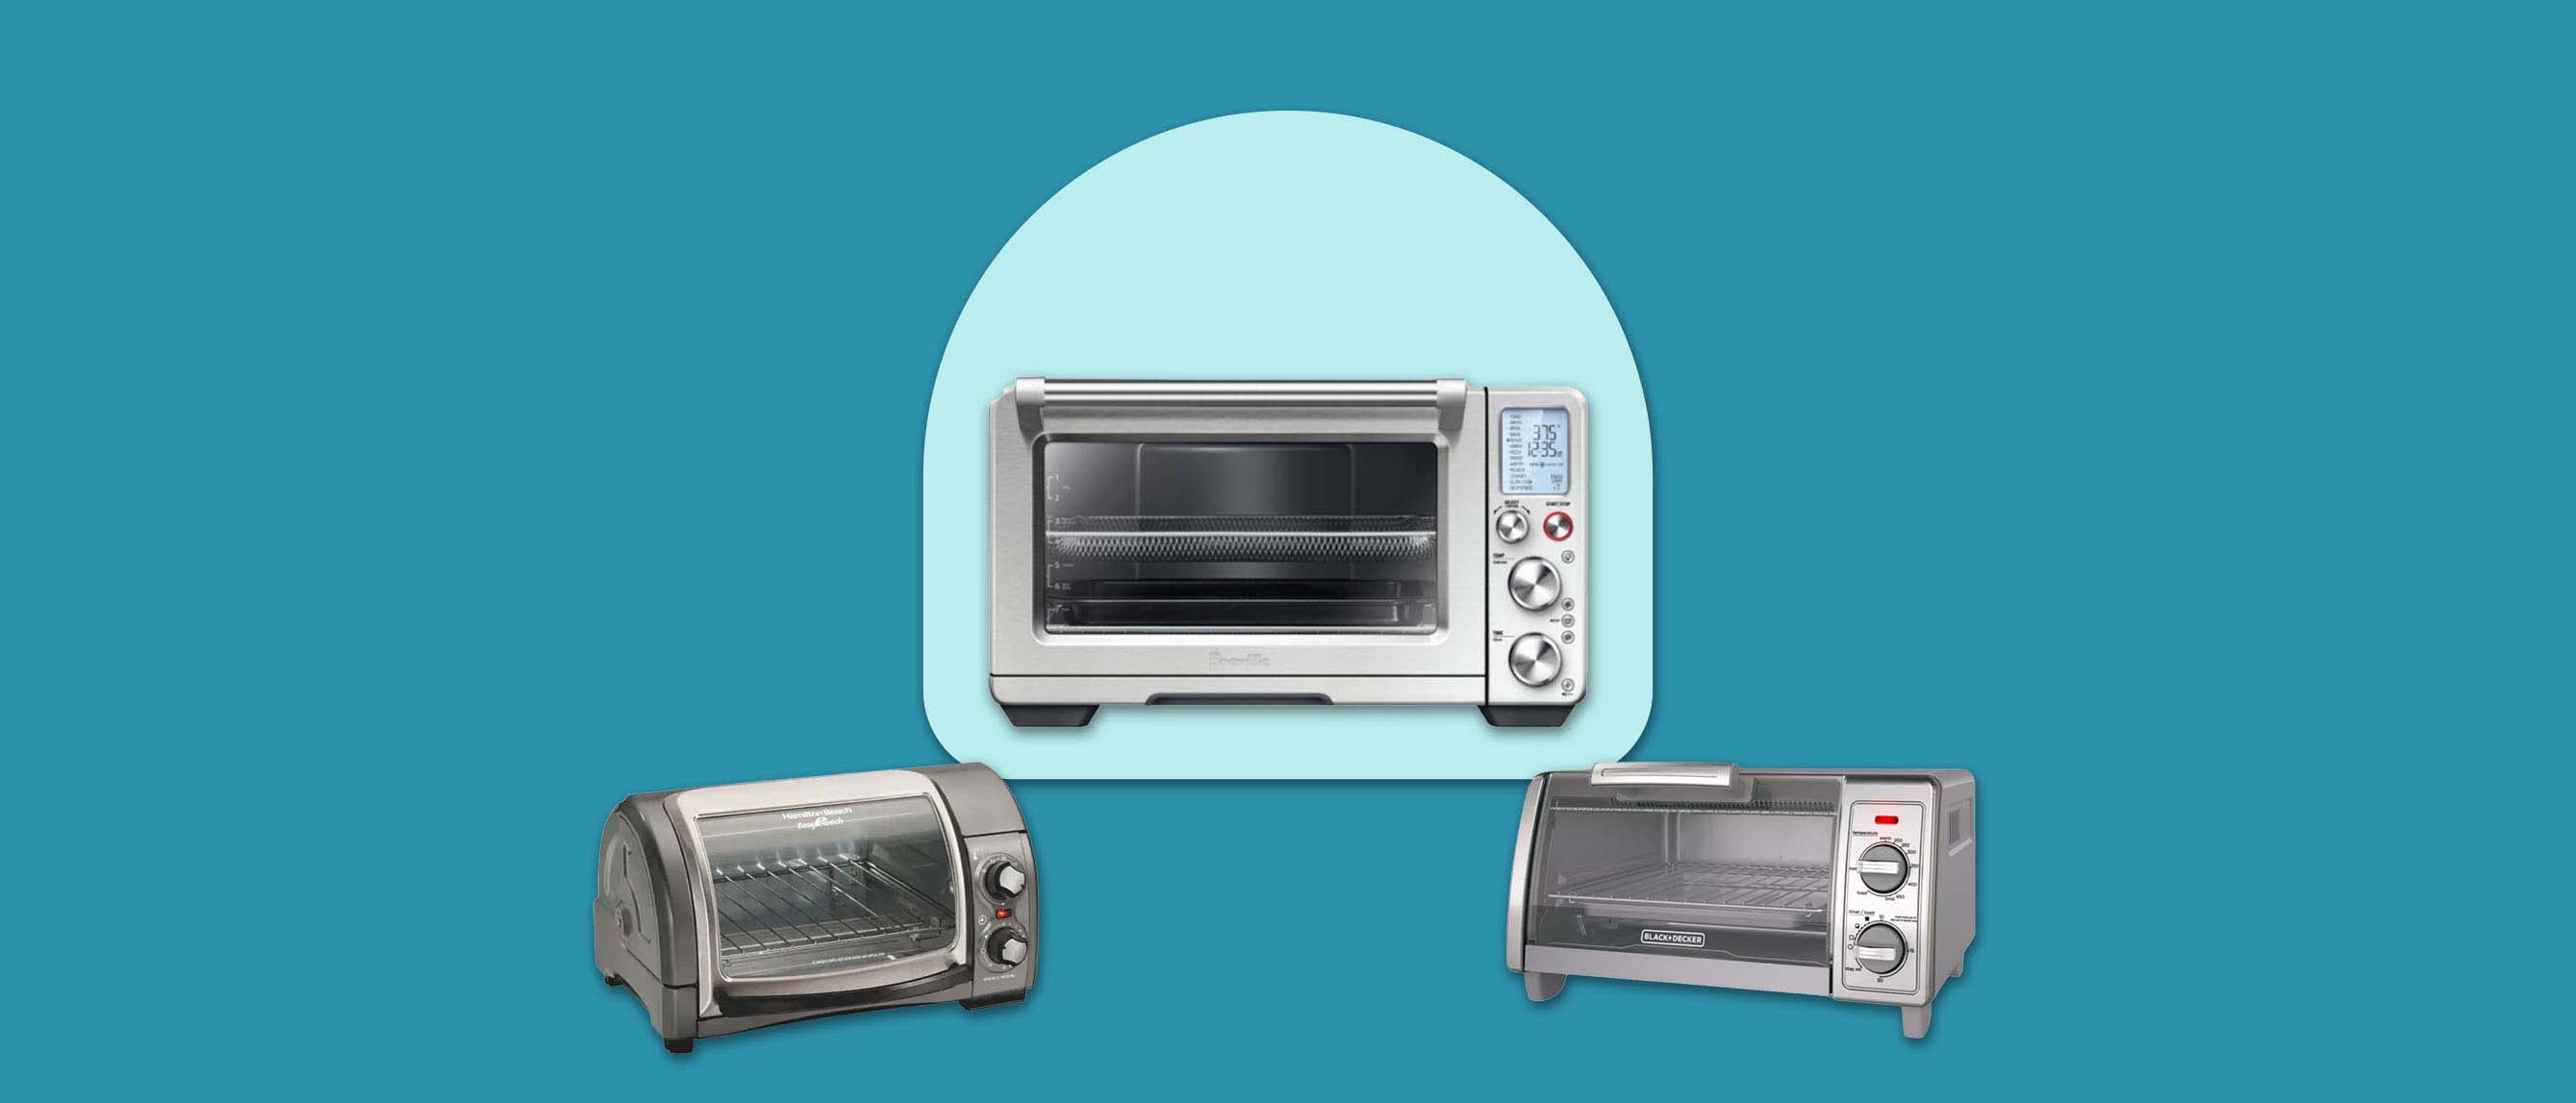 Image of 3 toaster ovens